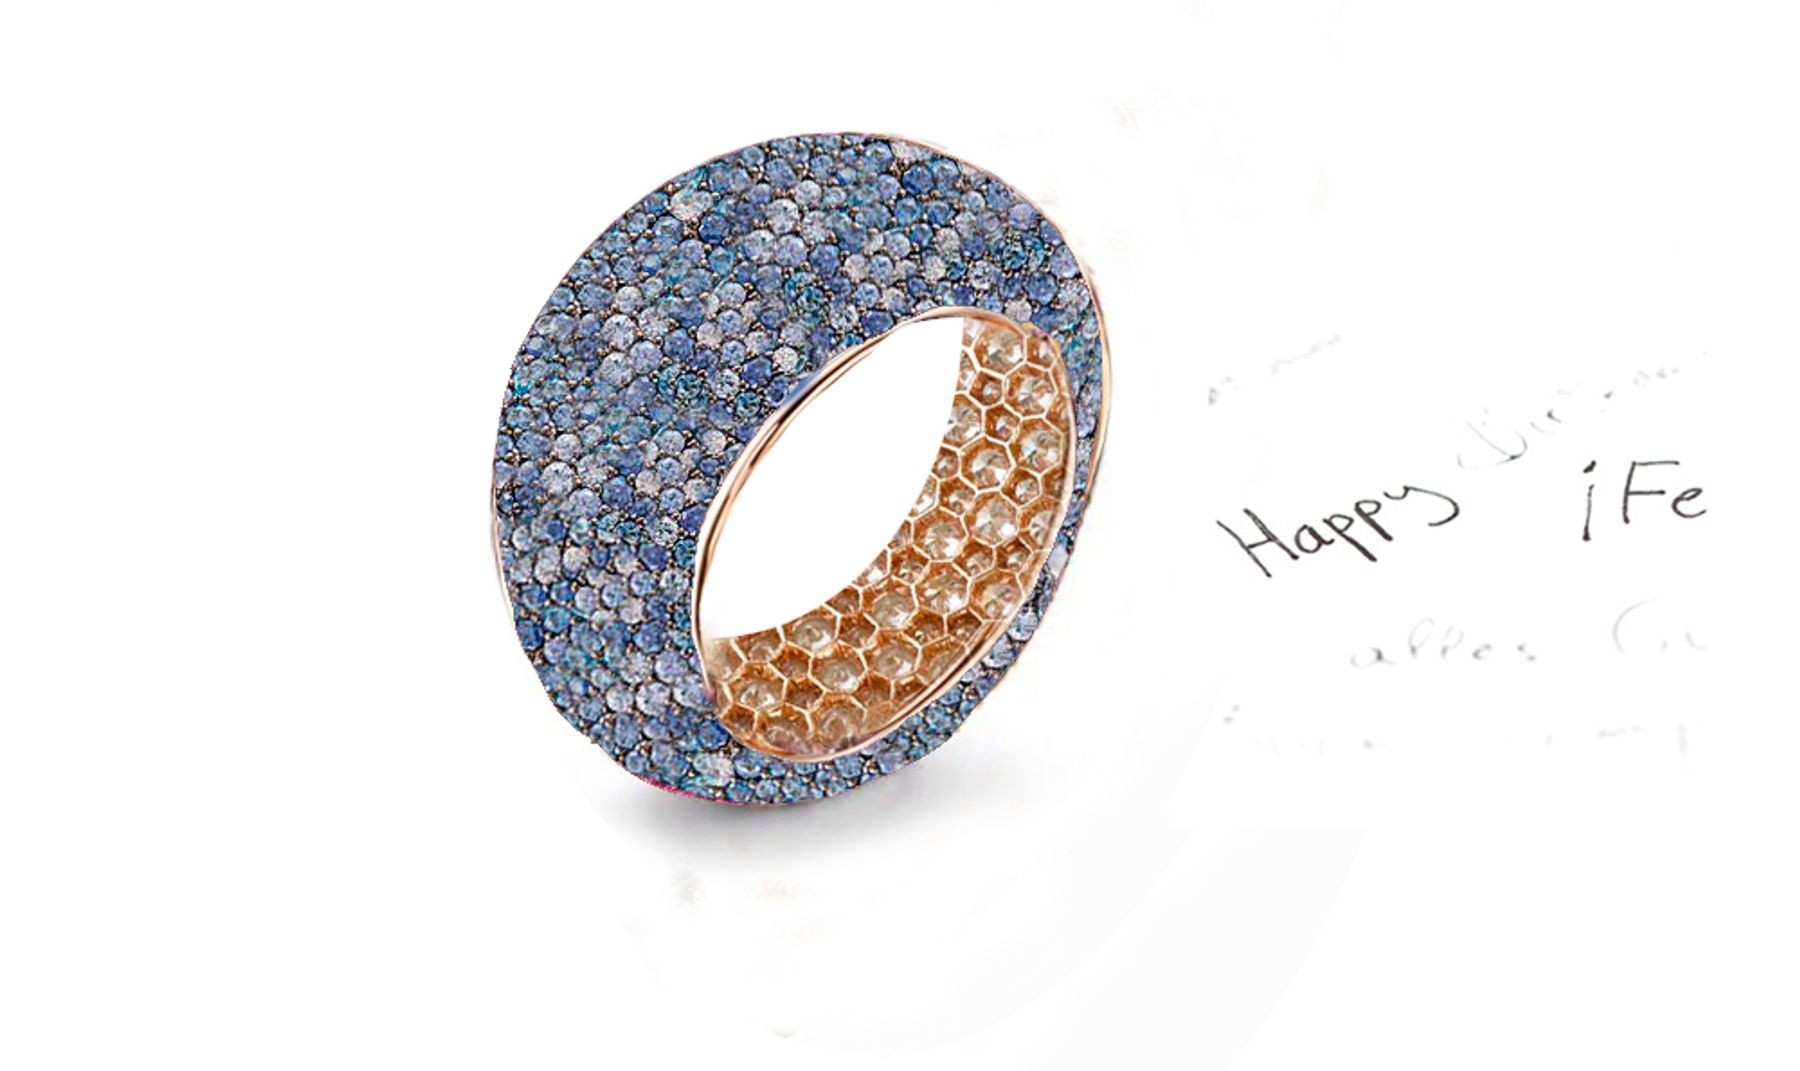 Symbolize Your Never-Ending Love With Eternity Rings Featuring Diamonds & Rubies, Emeralds & Sapphires